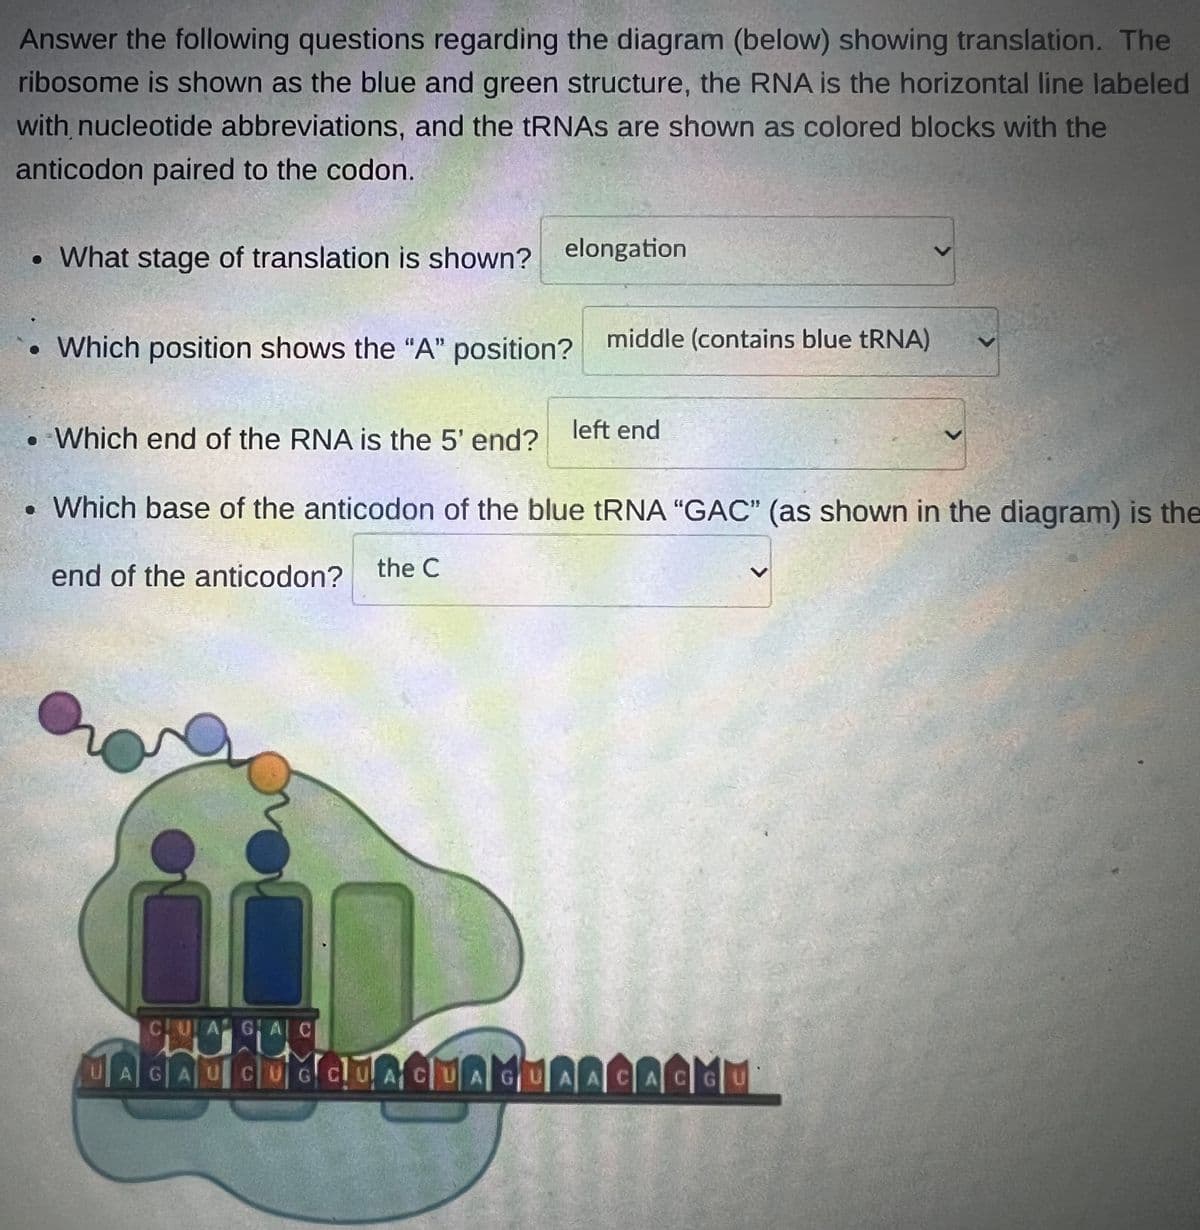 Answer the following questions regarding the diagram (below) showing translation. The
ribosome is shown as the blue and green structure, the RNA is the horizontal line labeled
with nucleotide abbreviations, and the tRNAs are shown as colored blocks with the
anticodon paired to the codon.
• What stage of translation is shown? elongation
⚫ Which position shows the "A" position? middle (contains blue tRNA)
. Which end of the RNA is the 5' end?
left end
• Which base of the anticodon of the blue tRNA "GAC" (as shown in the diagram) is the
end of the anticodon? the C
CUAGAC
AGAUCUGCUACUAGUAACACGU